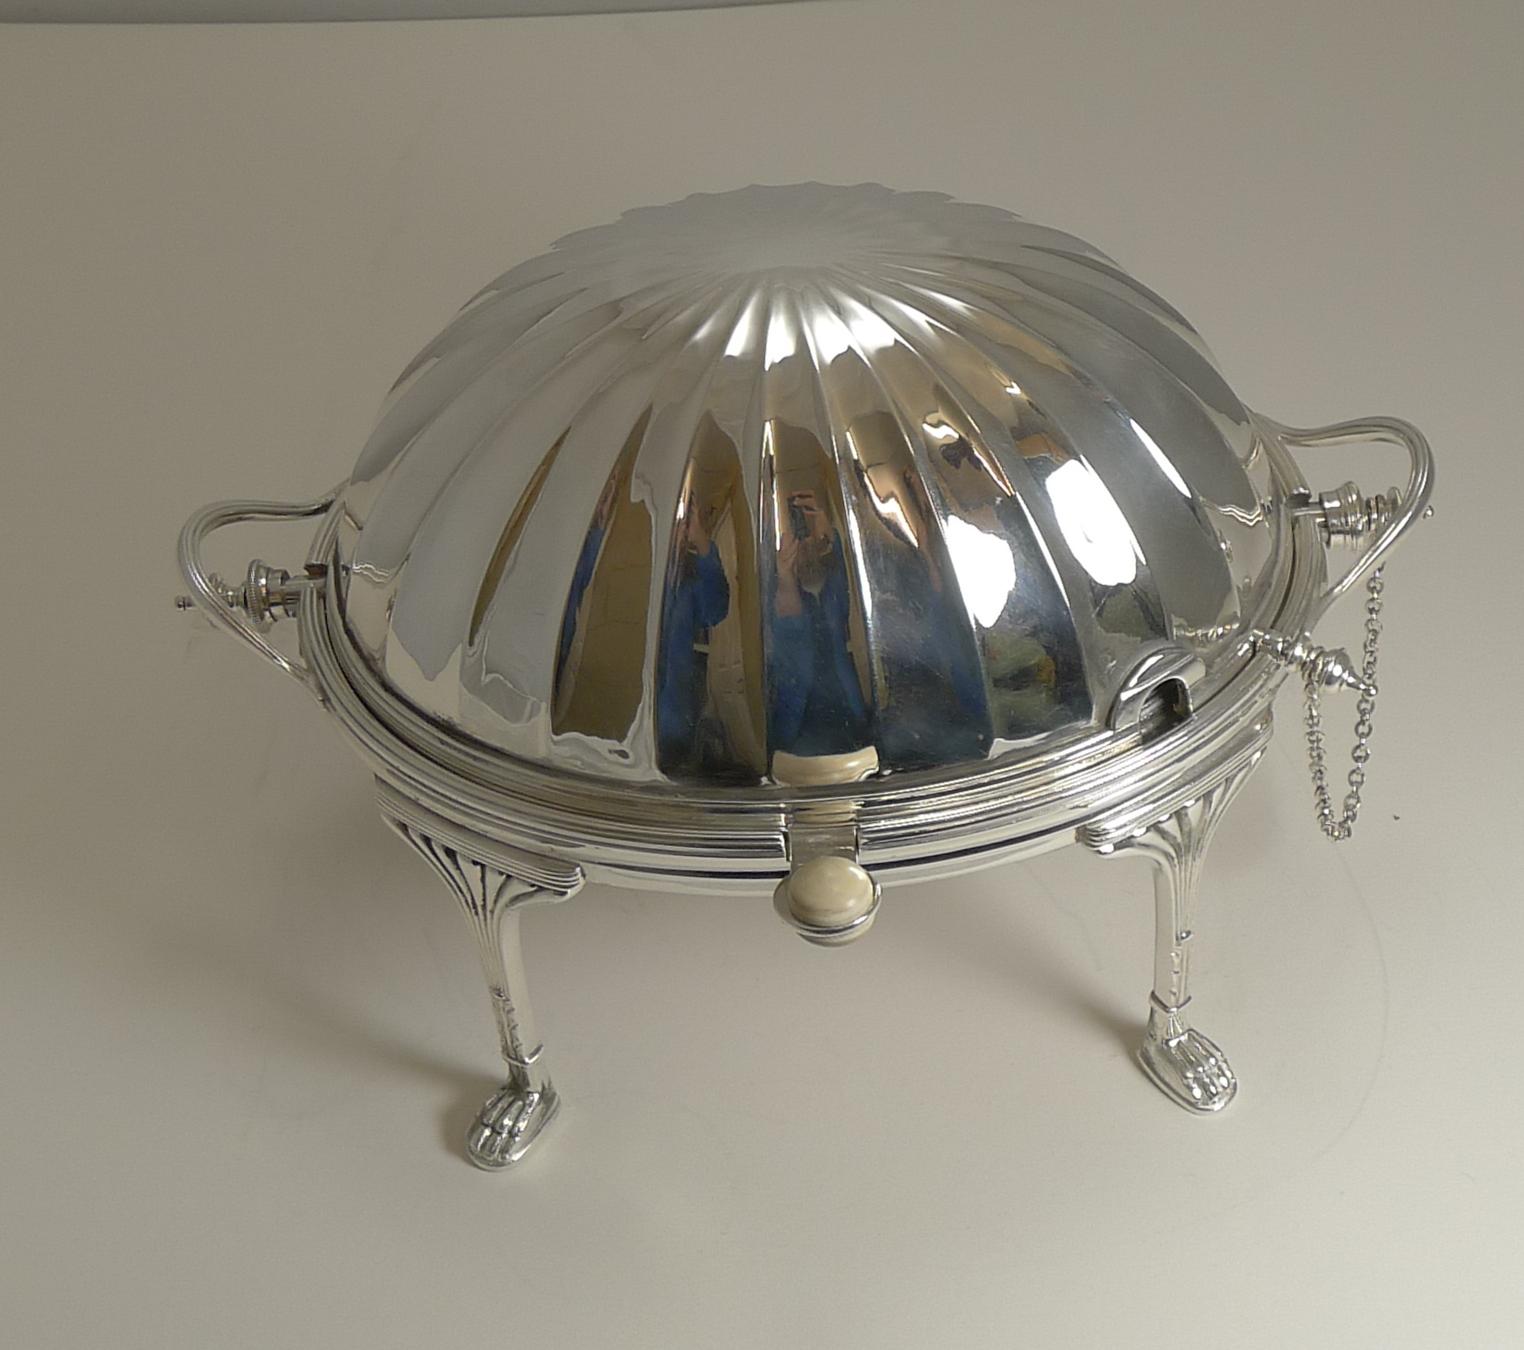 Antique English Silver Plated Revolving Breakfast / Serving Dish, Mappin & Webb 1